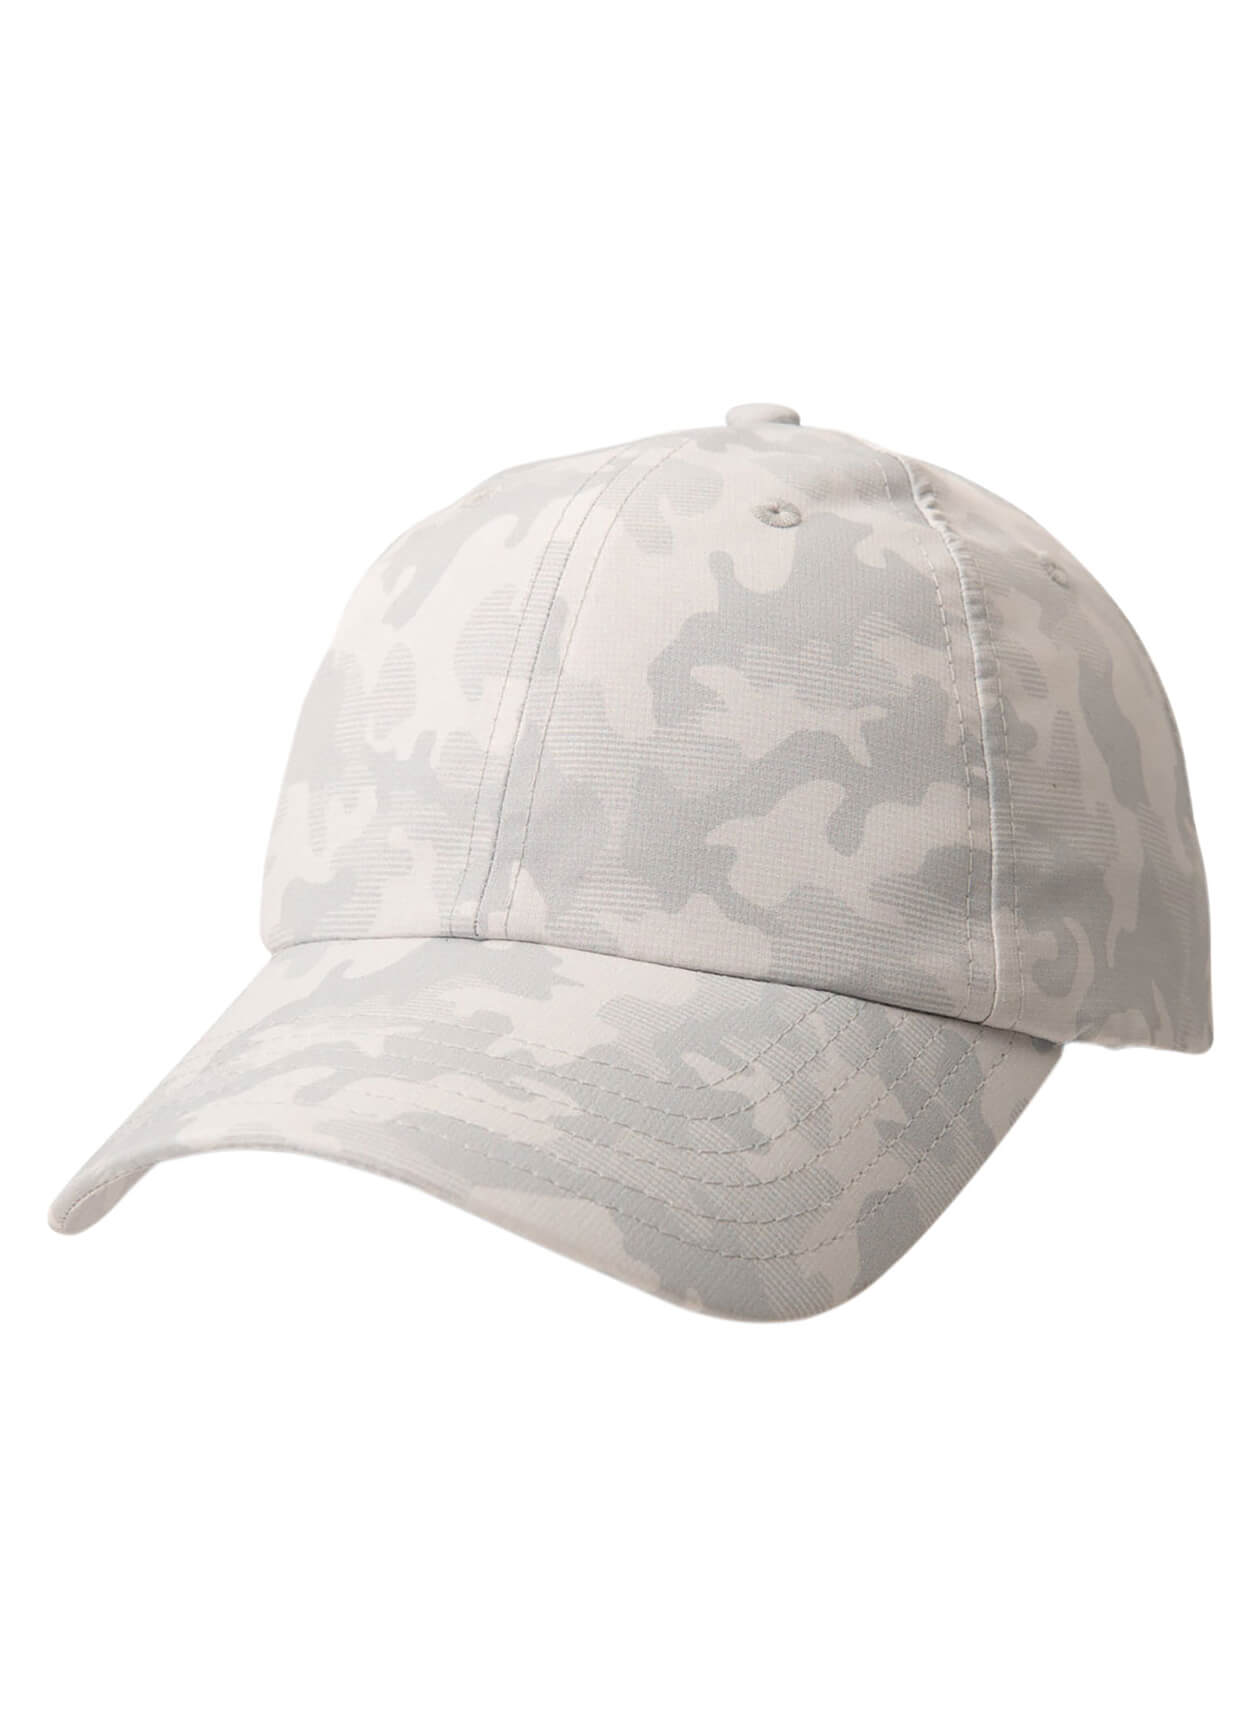 Southern Tide 9314 - Camo Printed Performance Hat